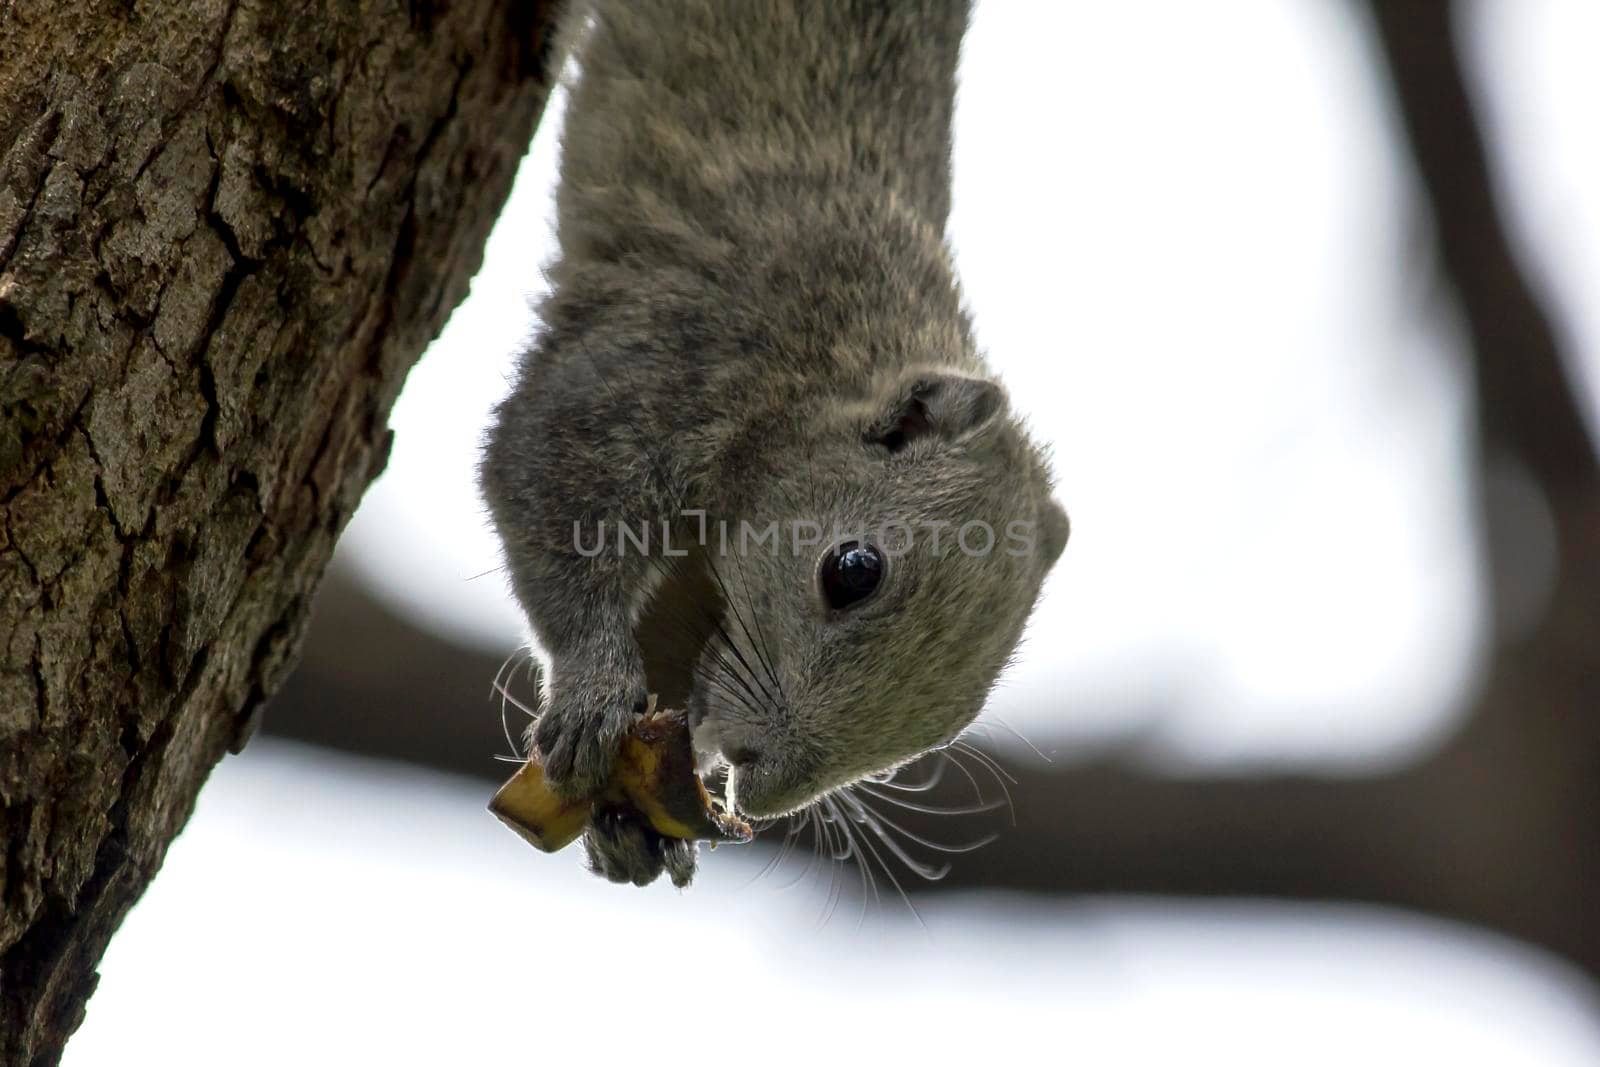 squirrel found in the trees in the garden by Puripatt